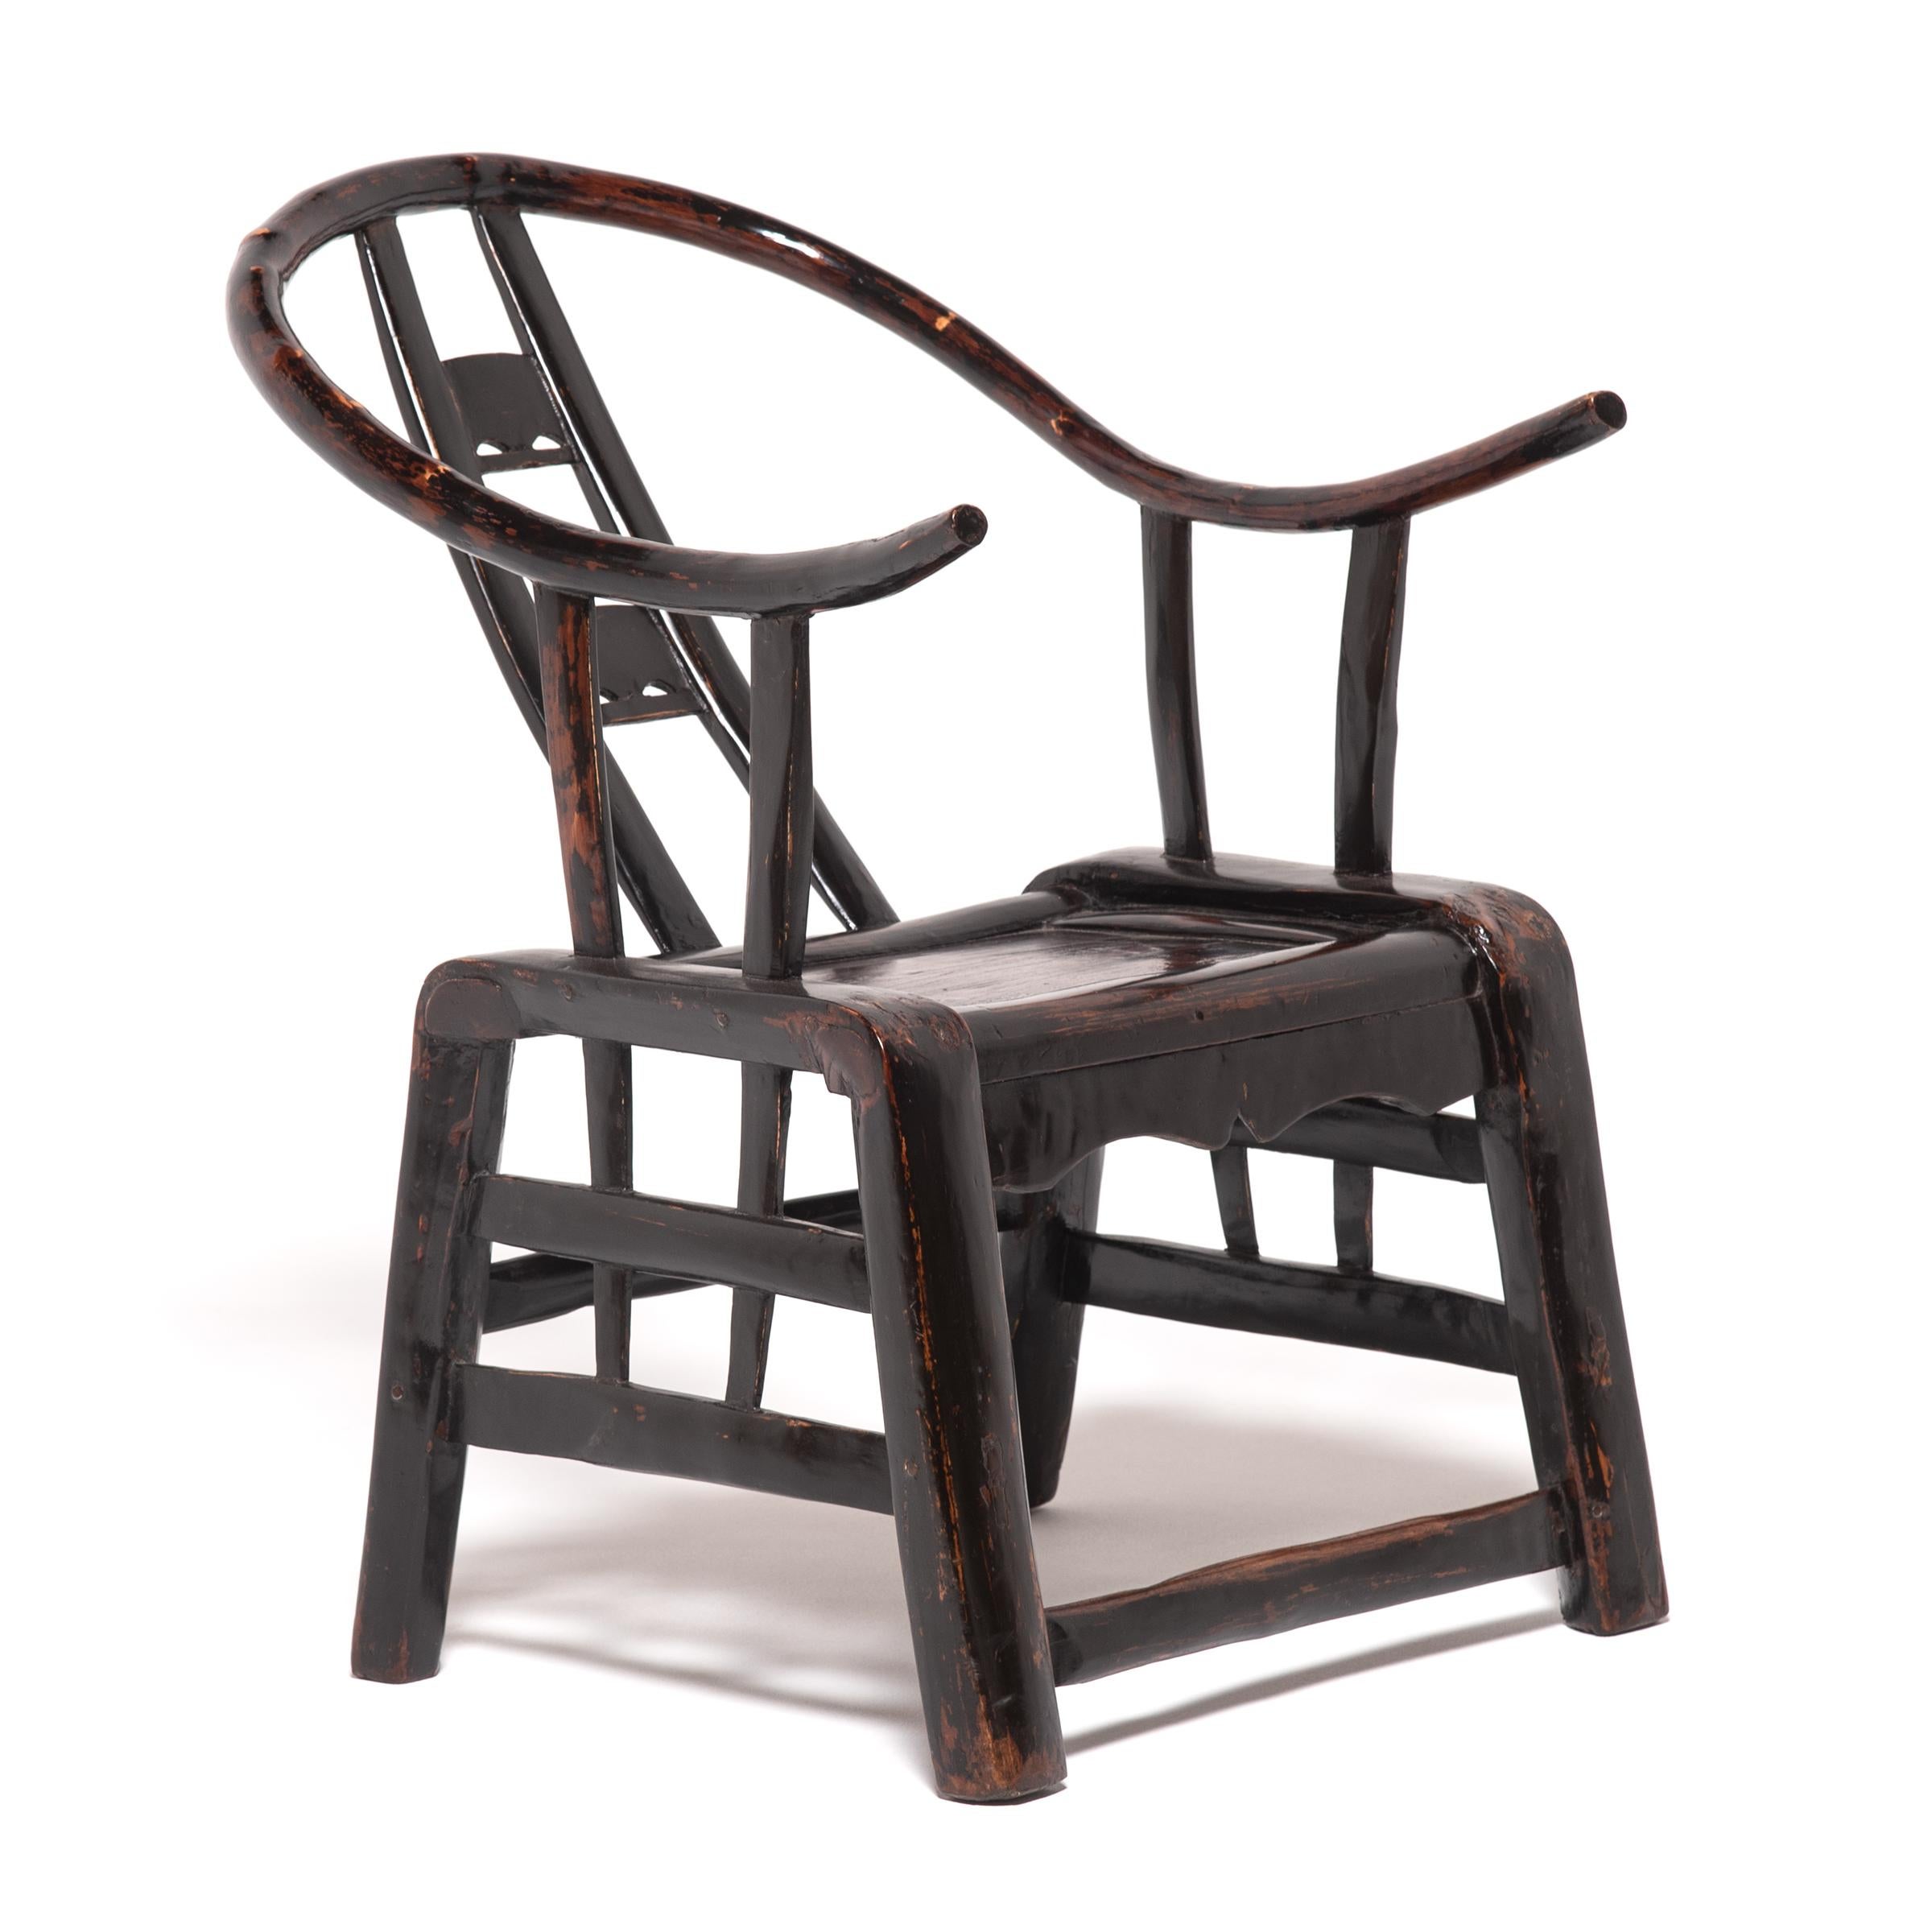 Qing Pair of Low Chinese Roundback Chairs, c. 1850 For Sale